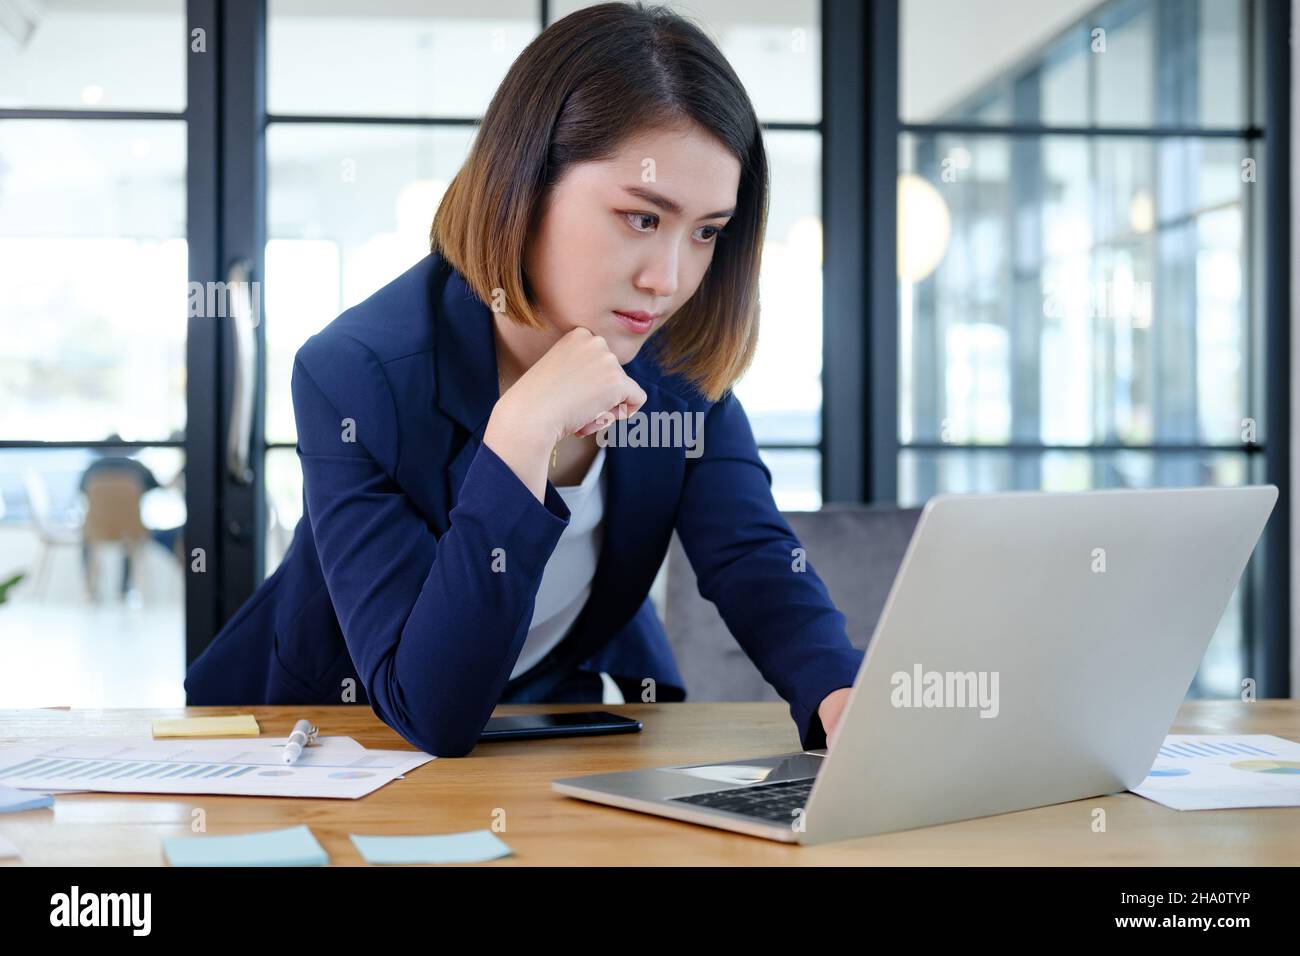 Portrait of beautiful and smart young entrepreneur businesswoman working in modern work station. Stock Photo